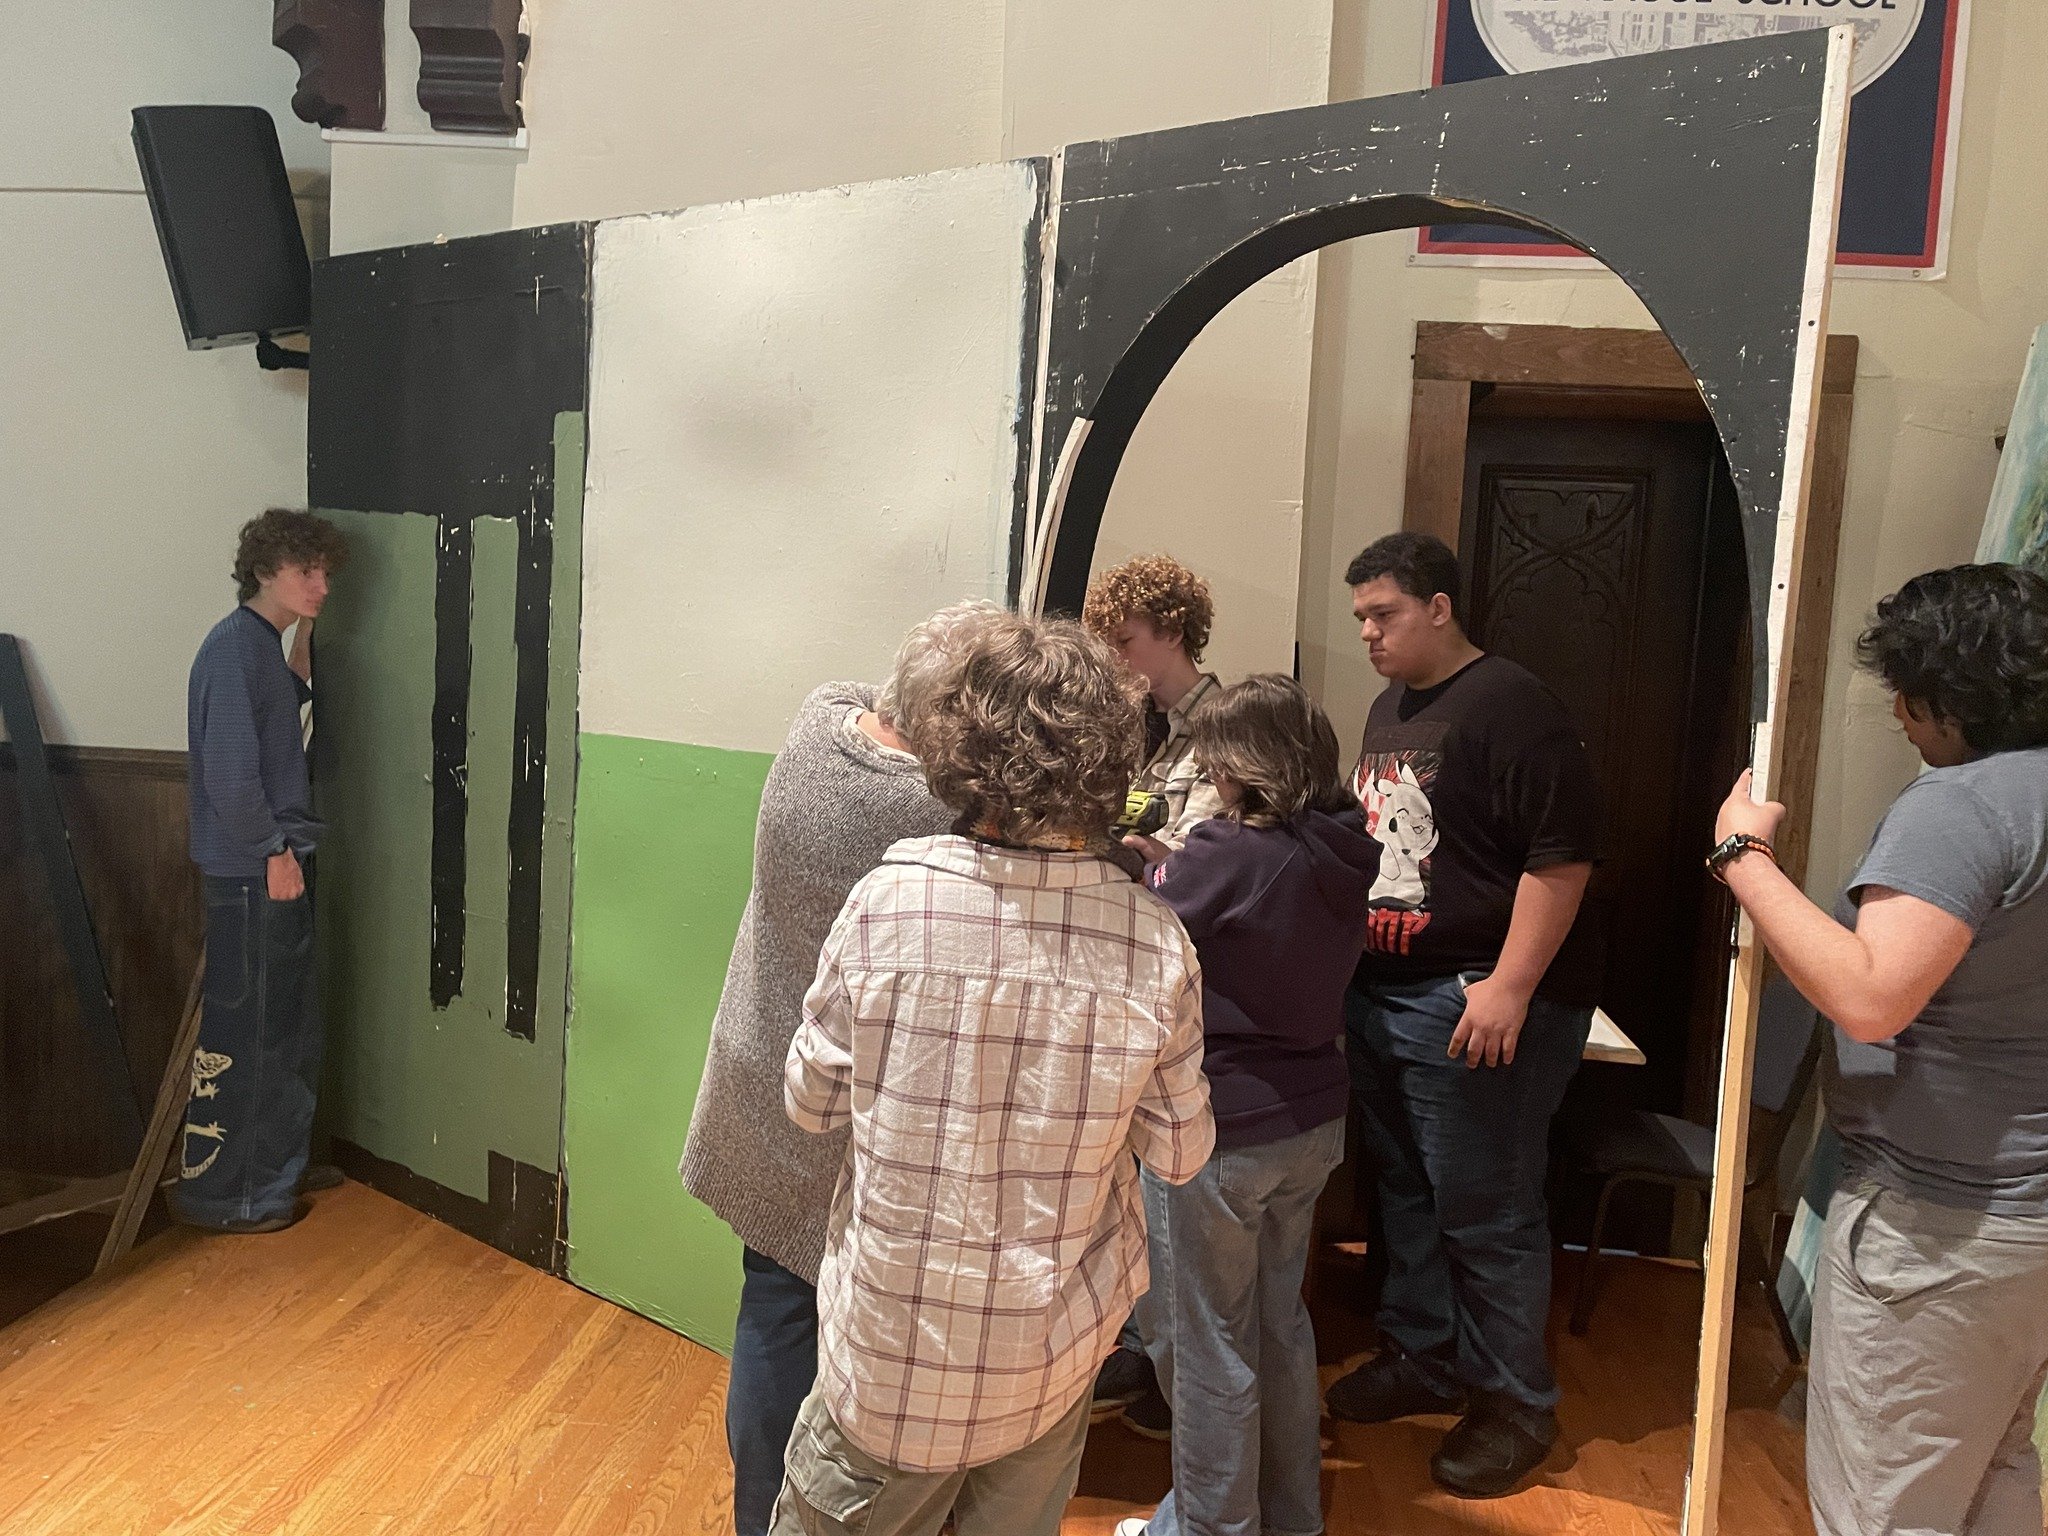 Our set build was a success this weekend thanks to the set designers from The Generic Theater along with our student and parent volunteers. The cast cannot wait to rehearse this week! Burglars, Bunglers, and Neighborhood Thieves opens on May 18th at 